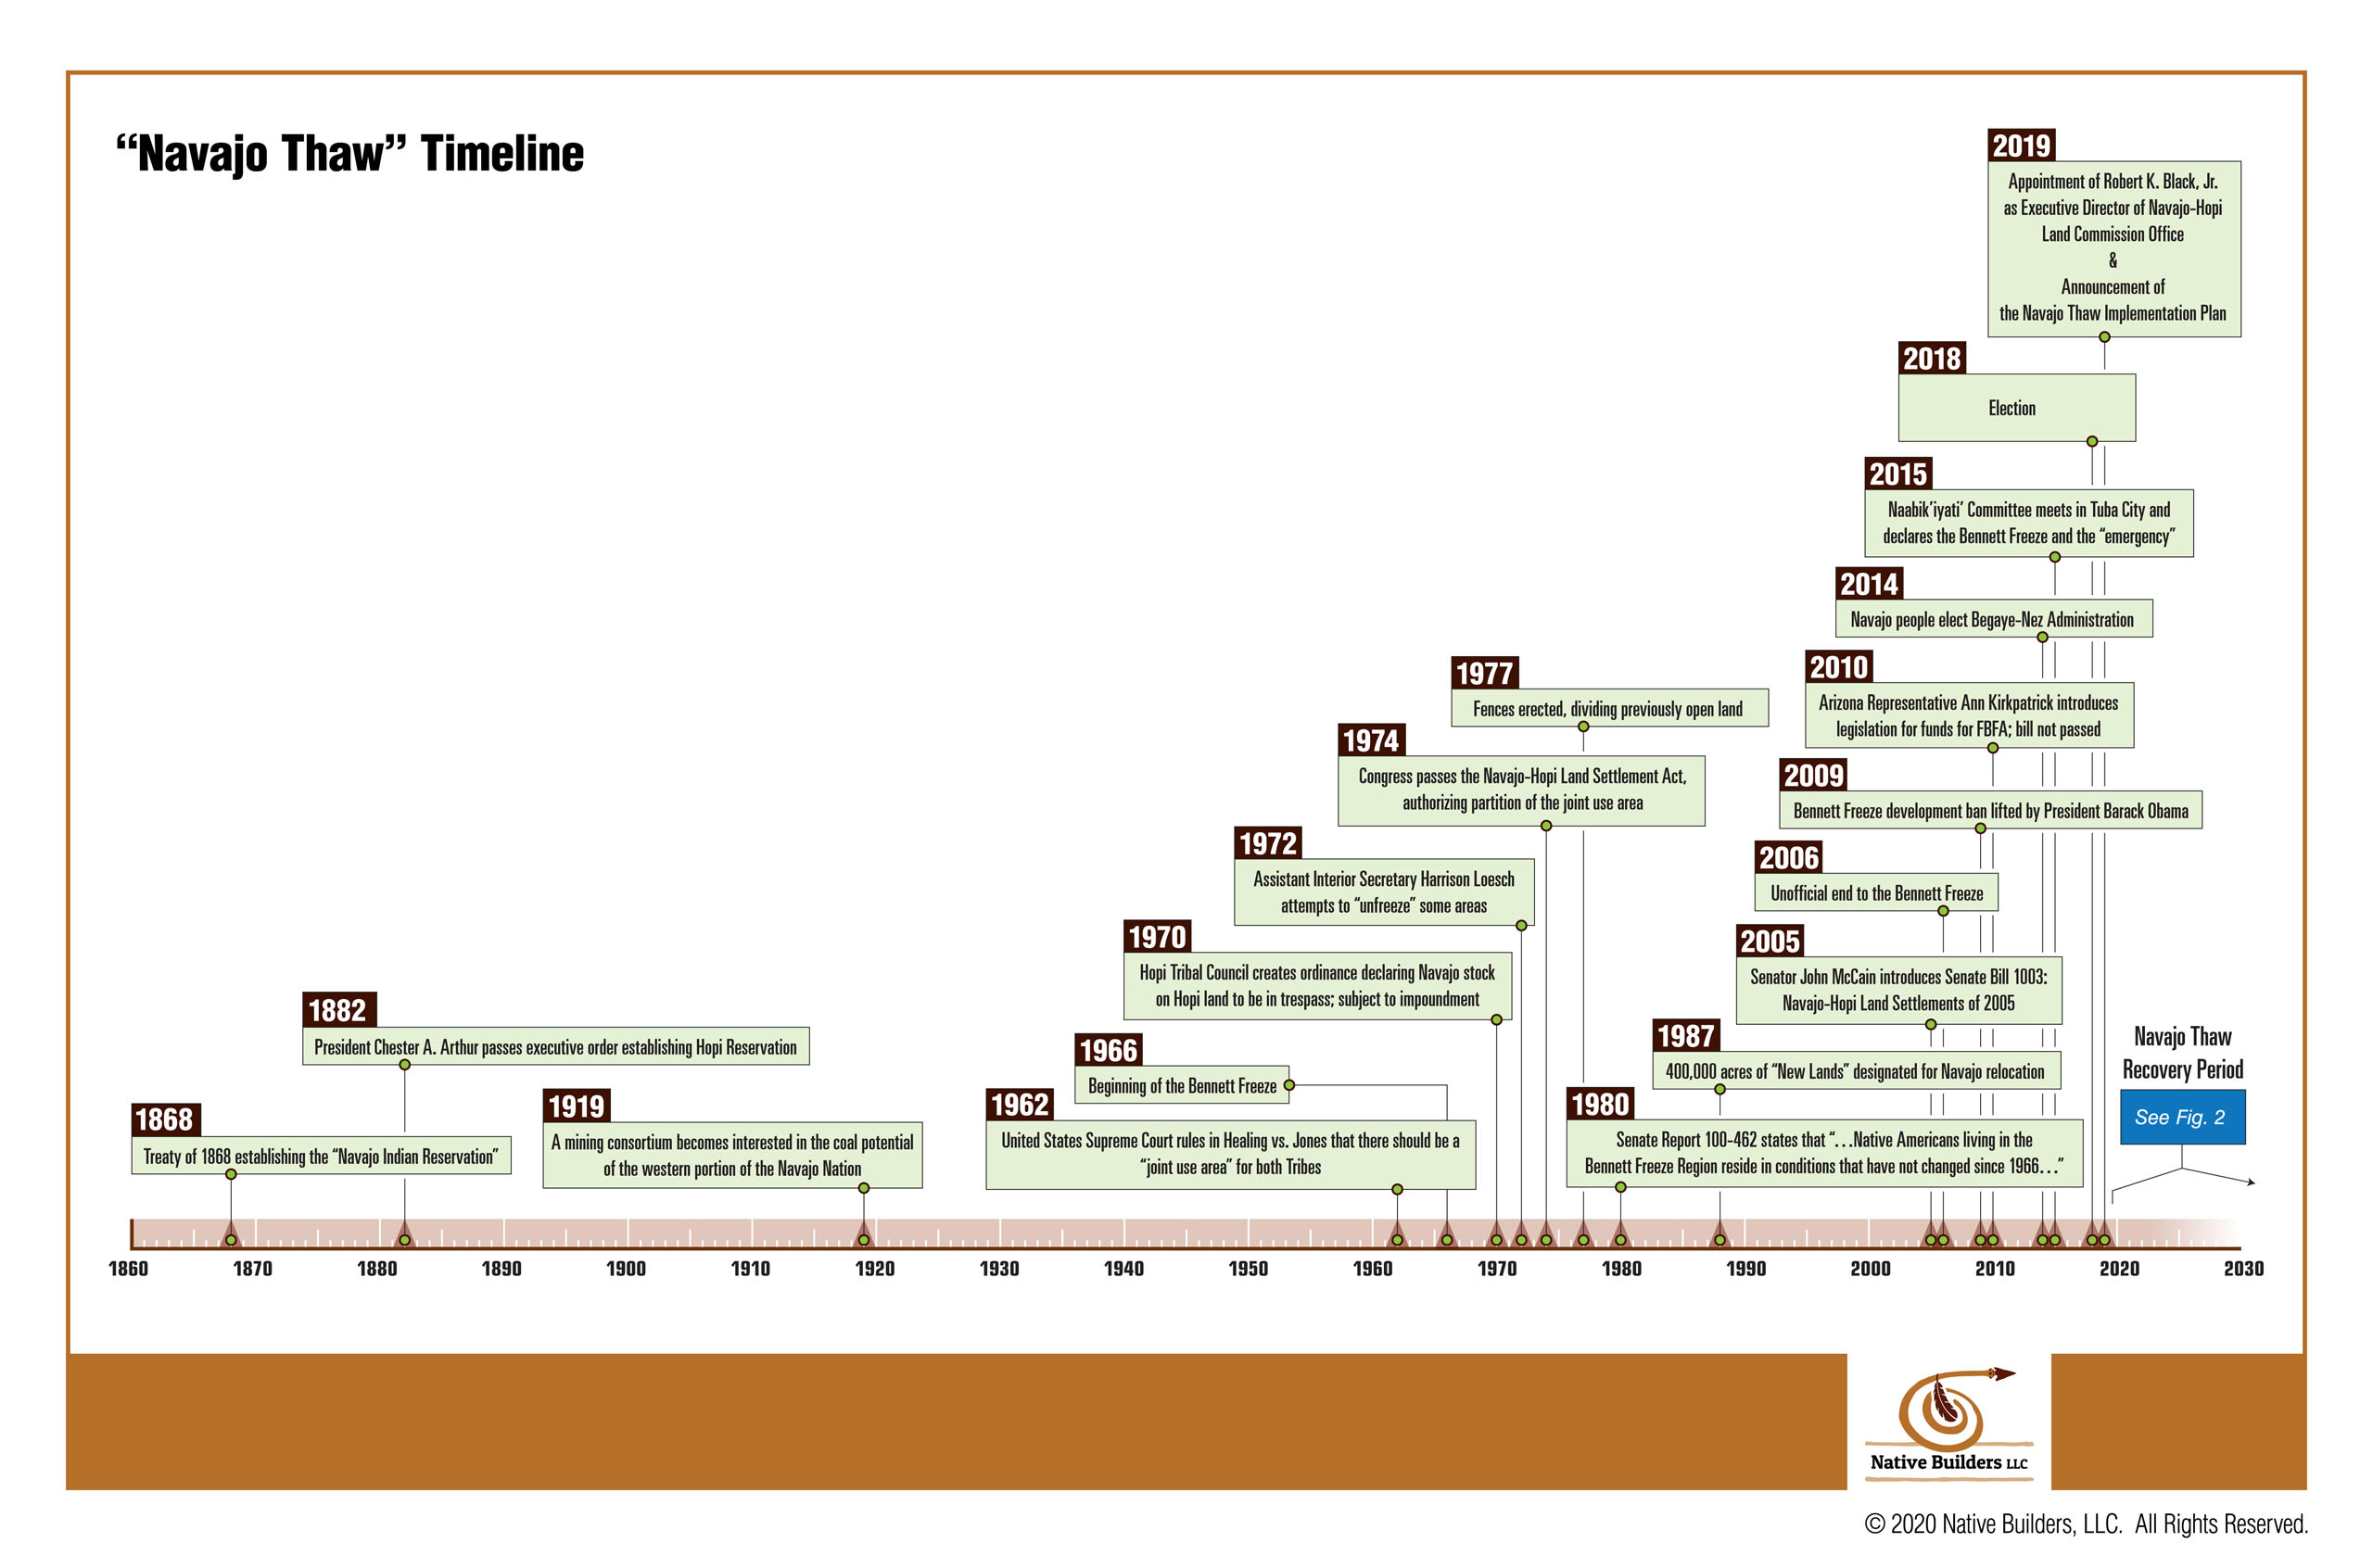 Navajo Thaw Timeline - Complete